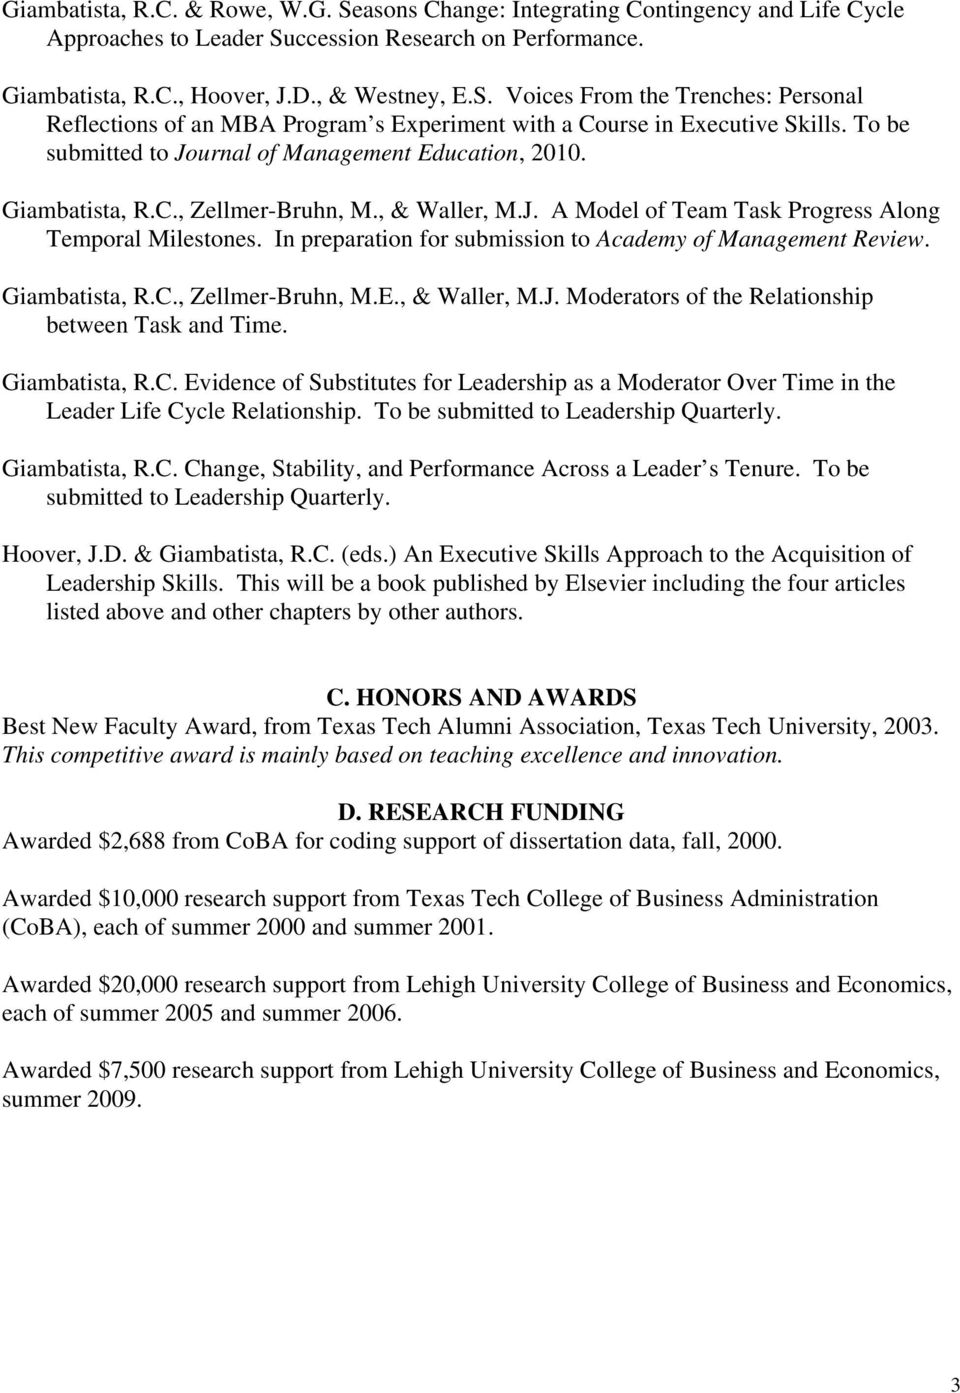 In preparation for submission to Academy of Management Review. Giambatista, R.C., Zellmer-Bruhn, M.E., & Waller, M.J. Moderators of the Relationship between Task and Time. Giambatista, R.C. Evidence of Substitutes for Leadership as a Moderator Over Time in the Leader Life Cycle Relationship.